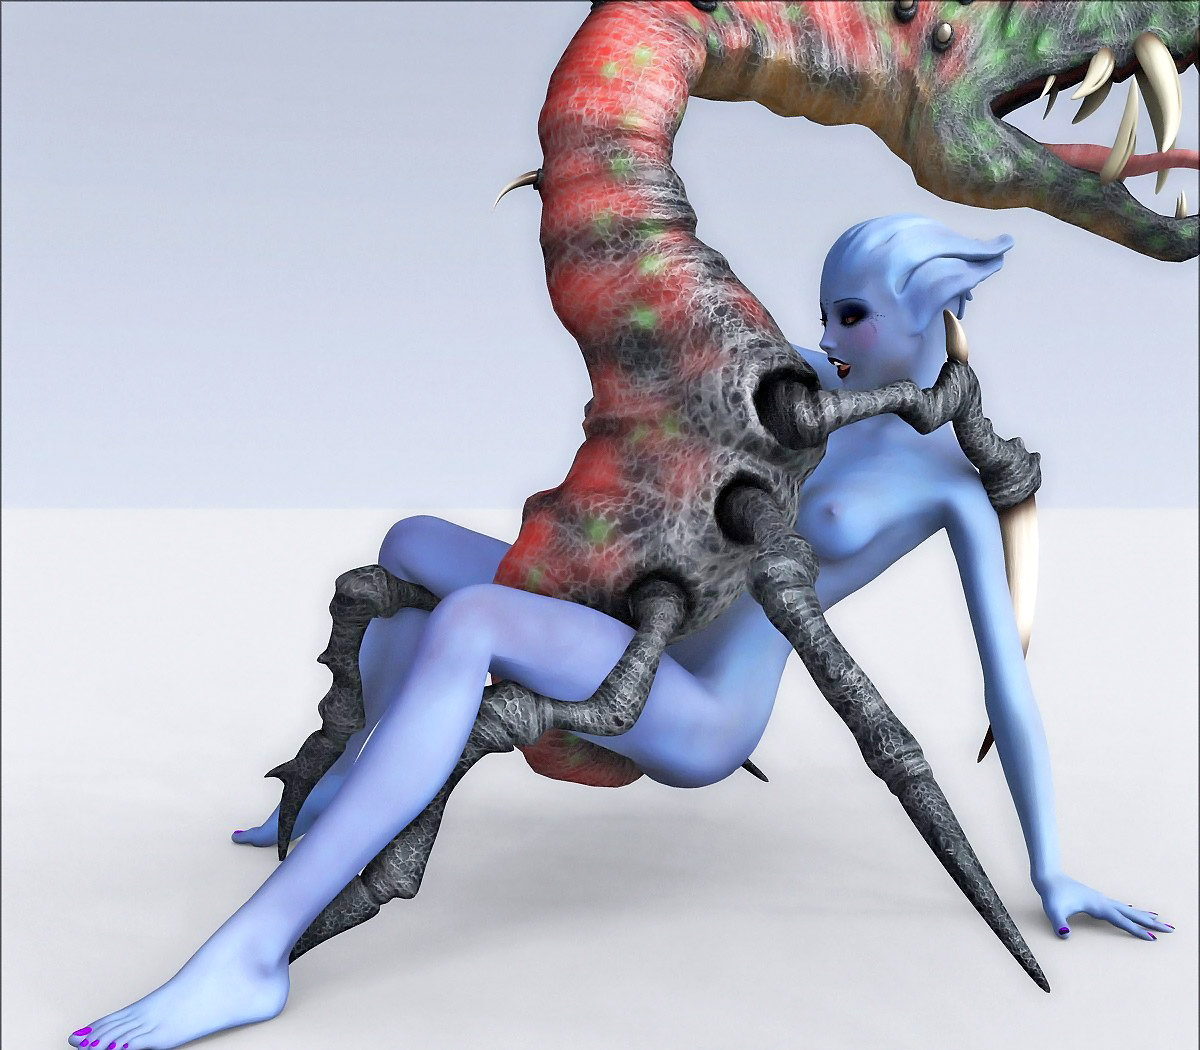 3d Insect Toon Porn Xxx - chick takes on big insect during 3d cartoon monster sex | 3dwerewolfporn.com